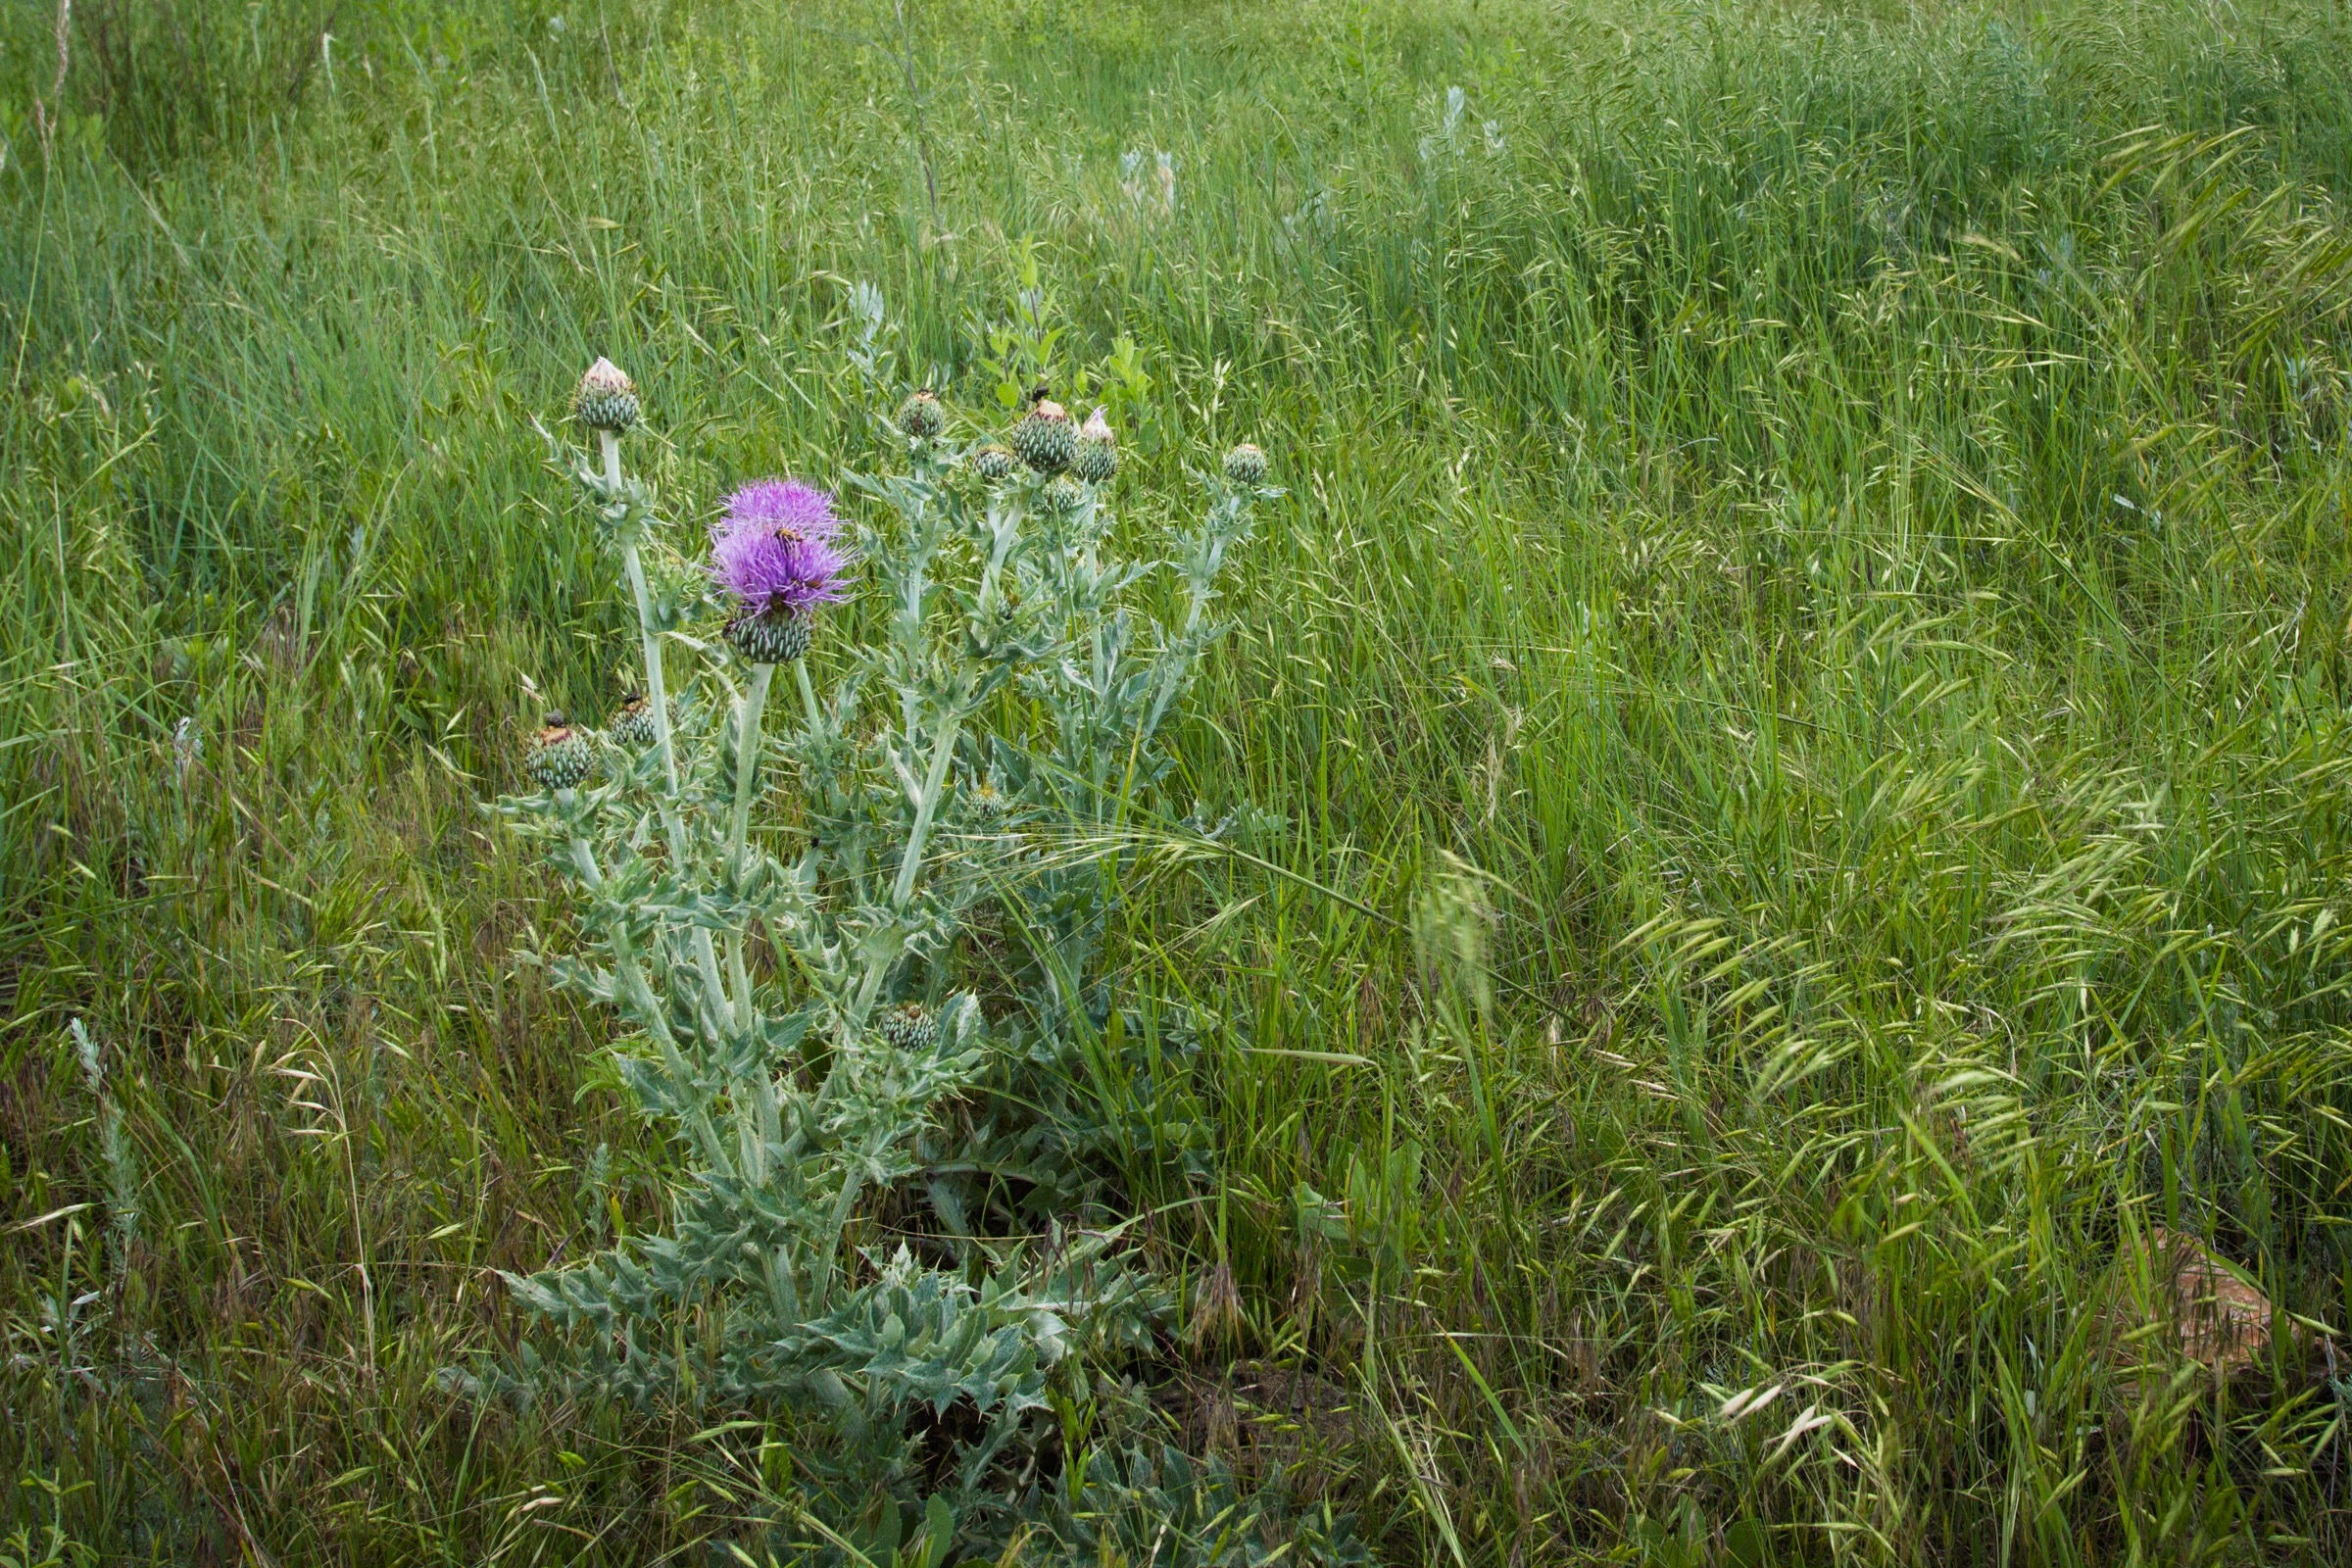 The wavyleaf thistle has silvery-green foliage and pink-purple flowers. The stem and leaves are covered in short pale hairs.